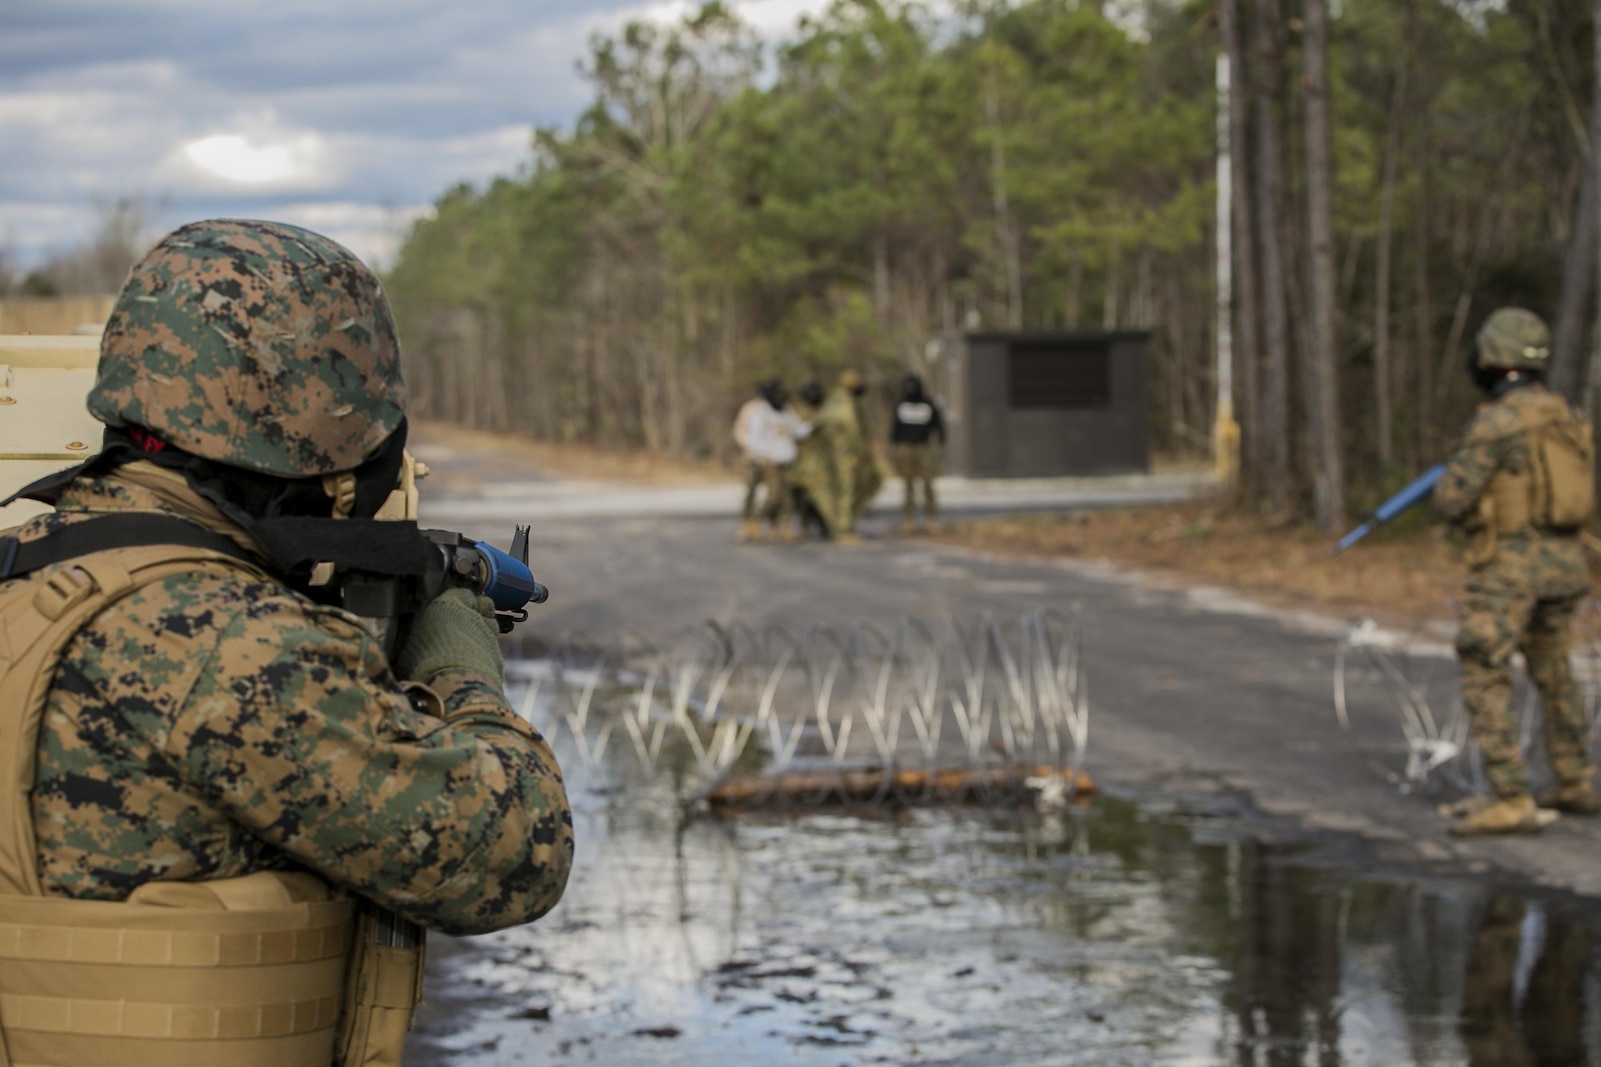 Marines with 2nd Law Enforcement Battalion confront -rock-throwing hostiles at Camp Lejeune, N.C., Feb. 9, 2016. This kind of training allows 2nd LEB to develop and practice all the capabilities that the unit brings to the Marine Expeditionary Unit. The obstacles that they faced included rugged environments, improvised explosive devices and ambushes by the enemy. (U.S. Marine Corps photo by Lance Cpl. Luke Hoogendam/Released)